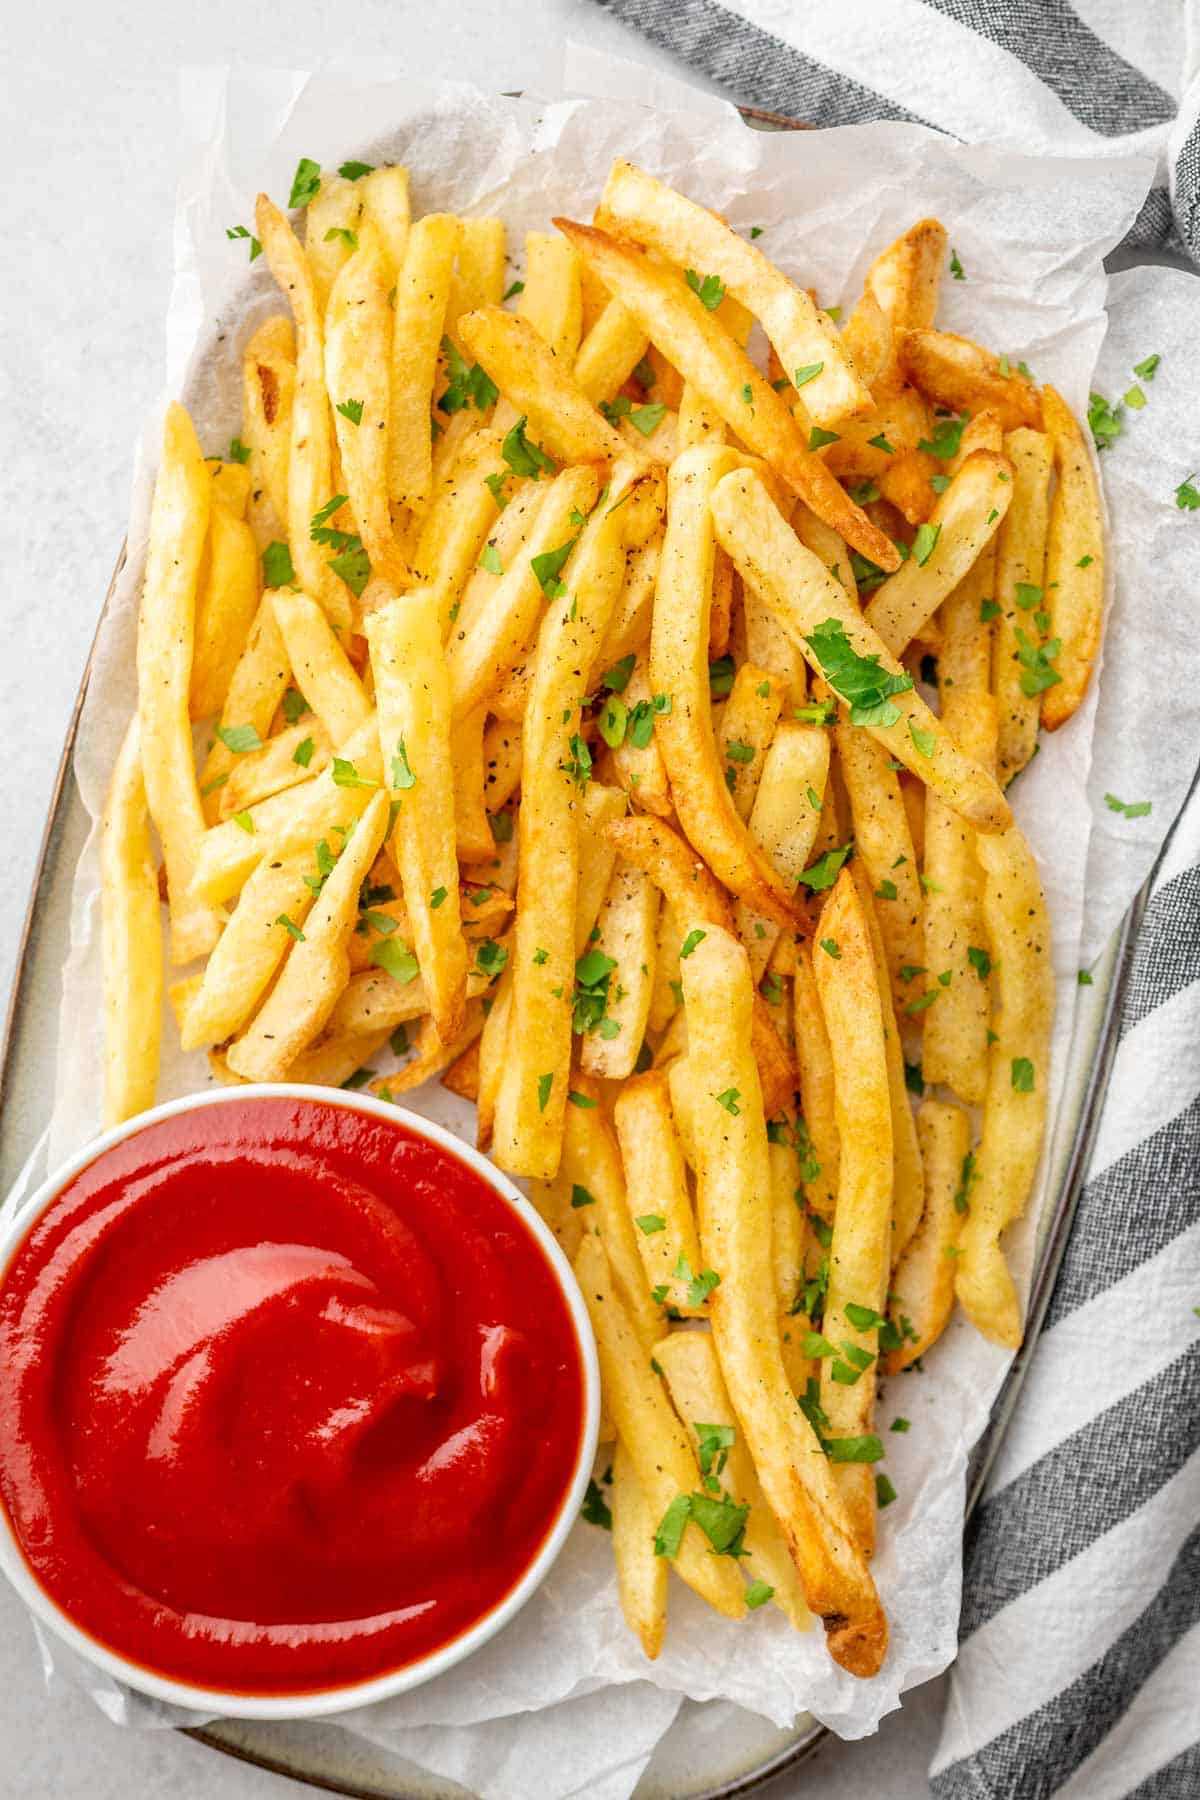 crispy fries garnished with herbs served with ketchup